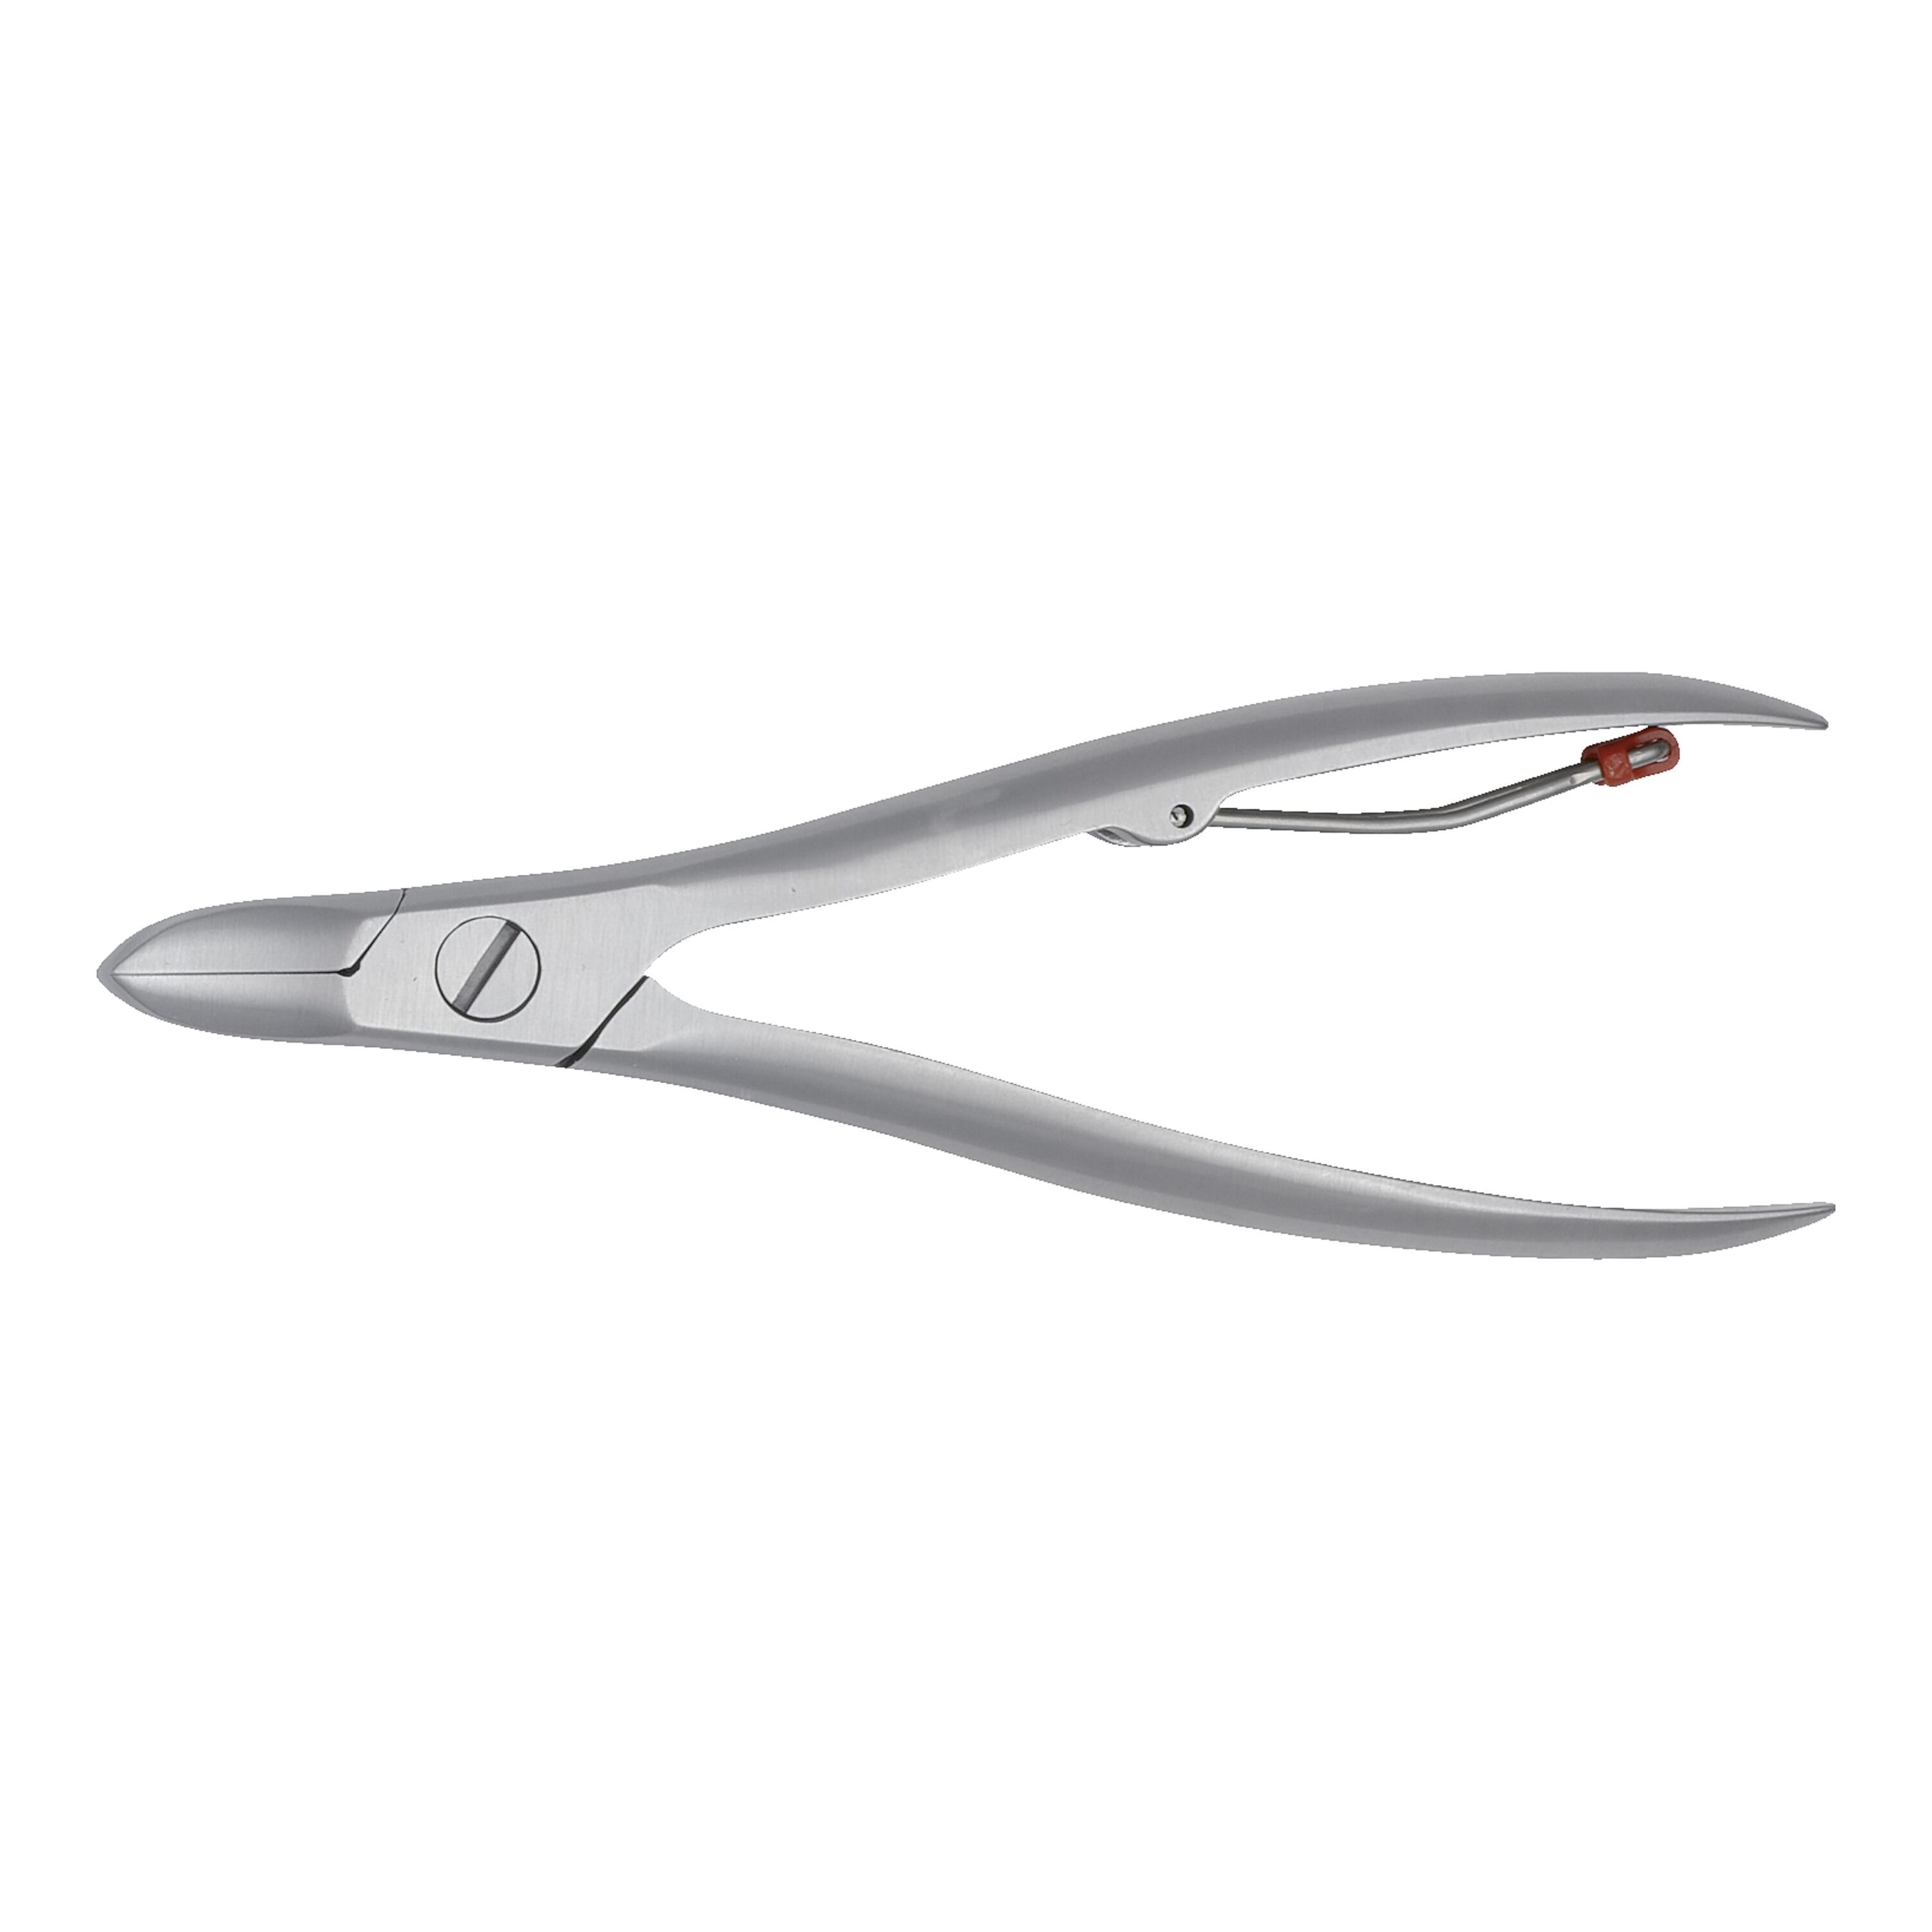 ZWILLING Nail Clipper Clippers Clipper Nail Scissors Manicure Red